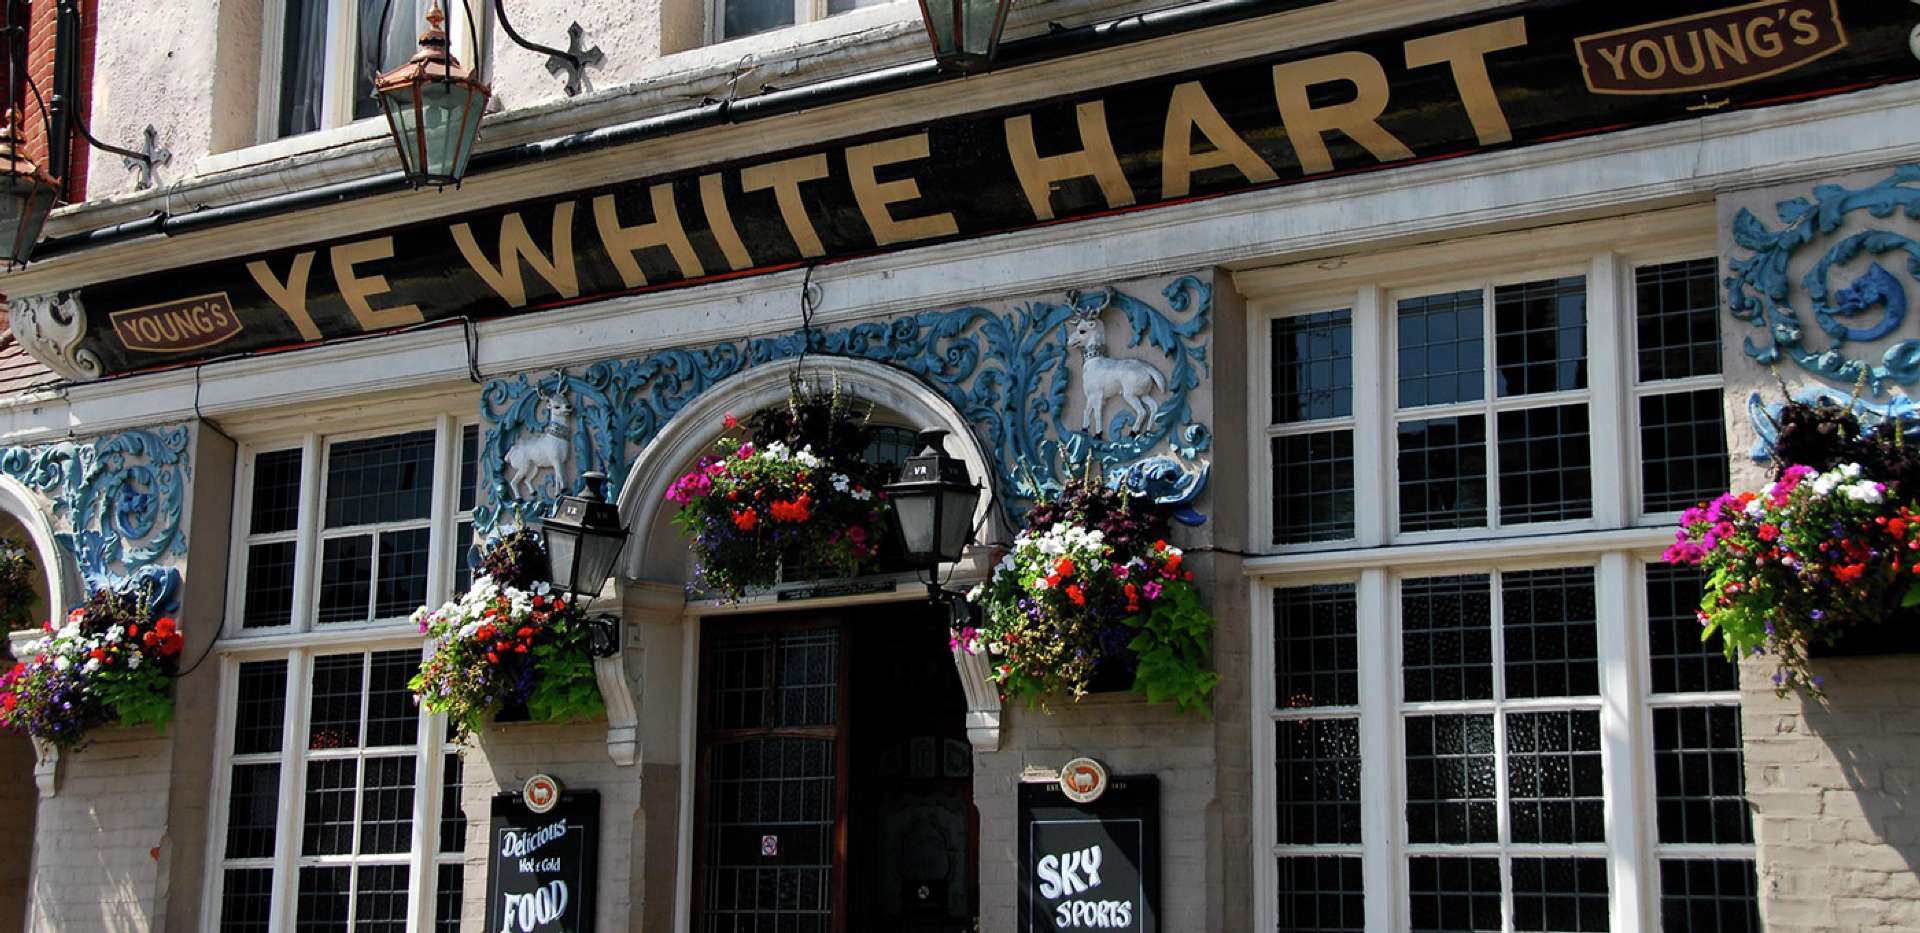 St James, Queen Mary's Place, Ye White Hart, Local Area